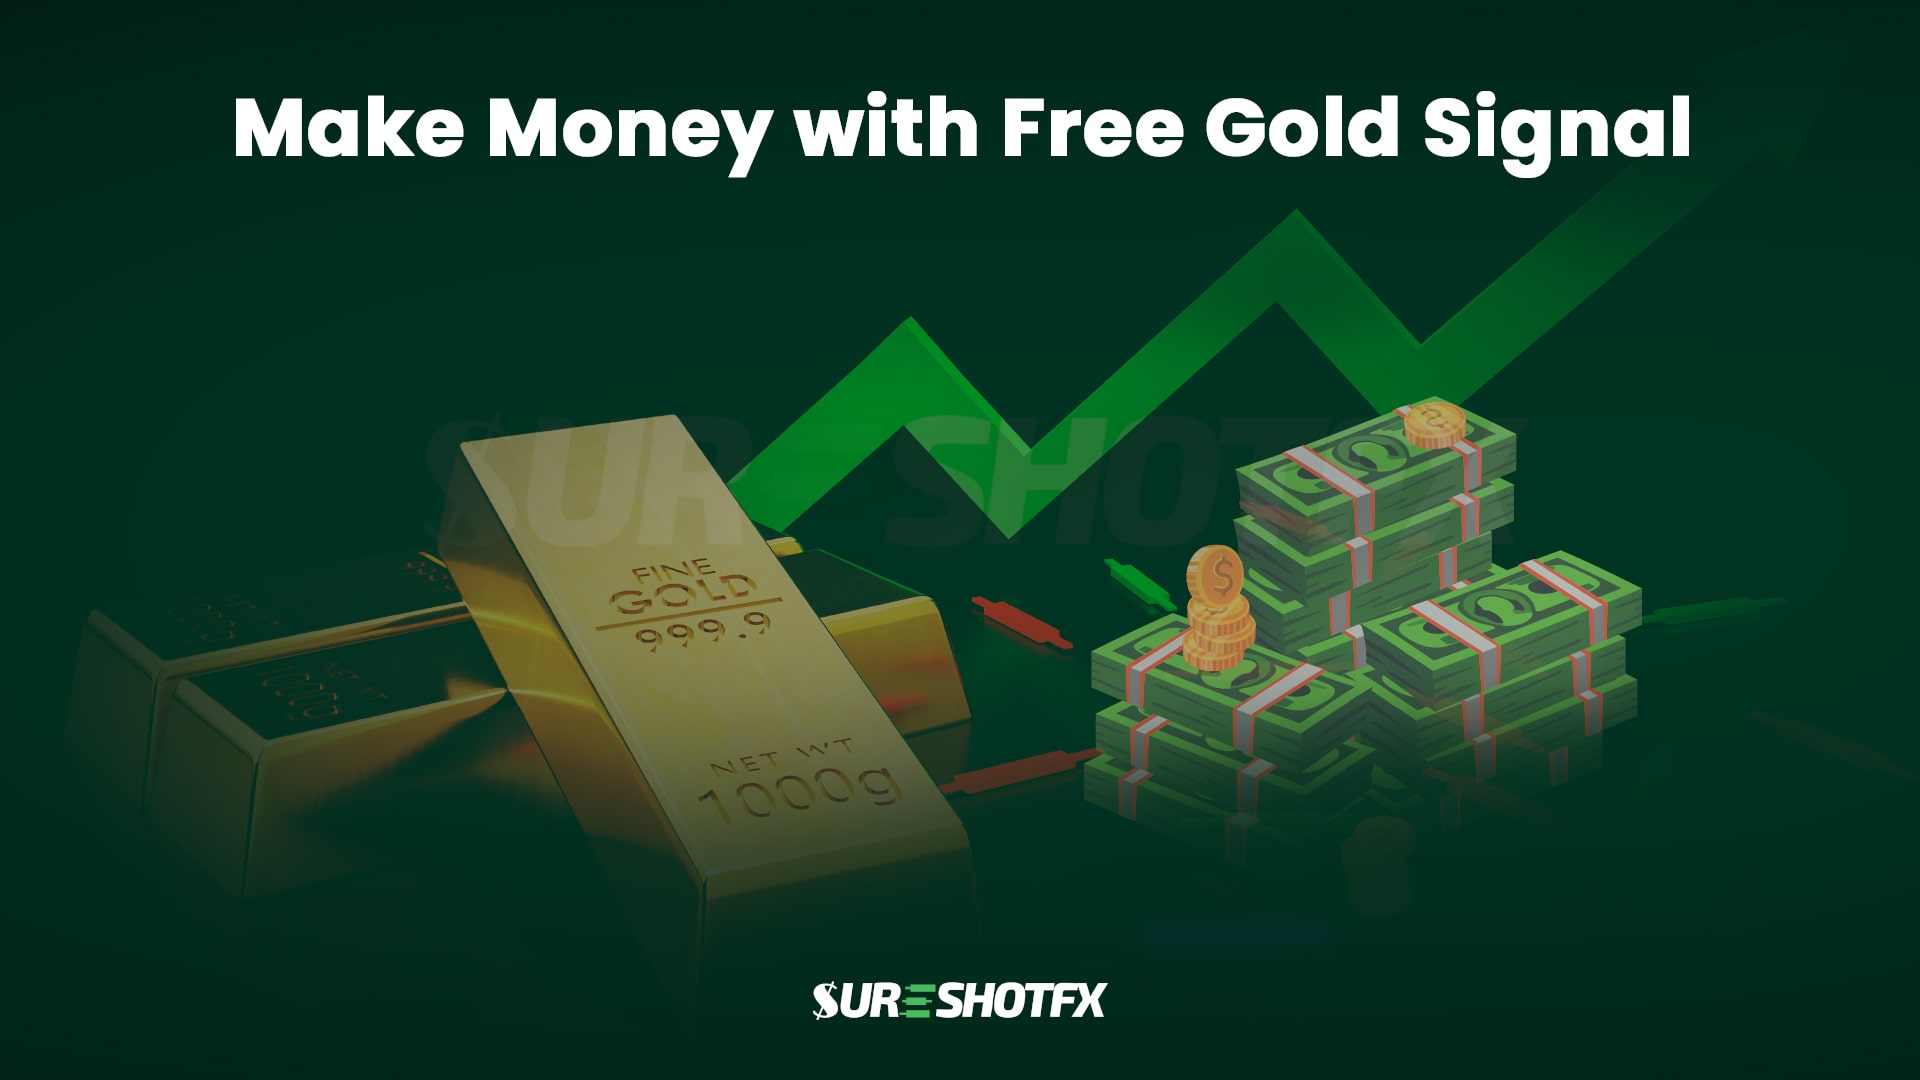 make money with free gold signal depiction image with symbols and trading graph